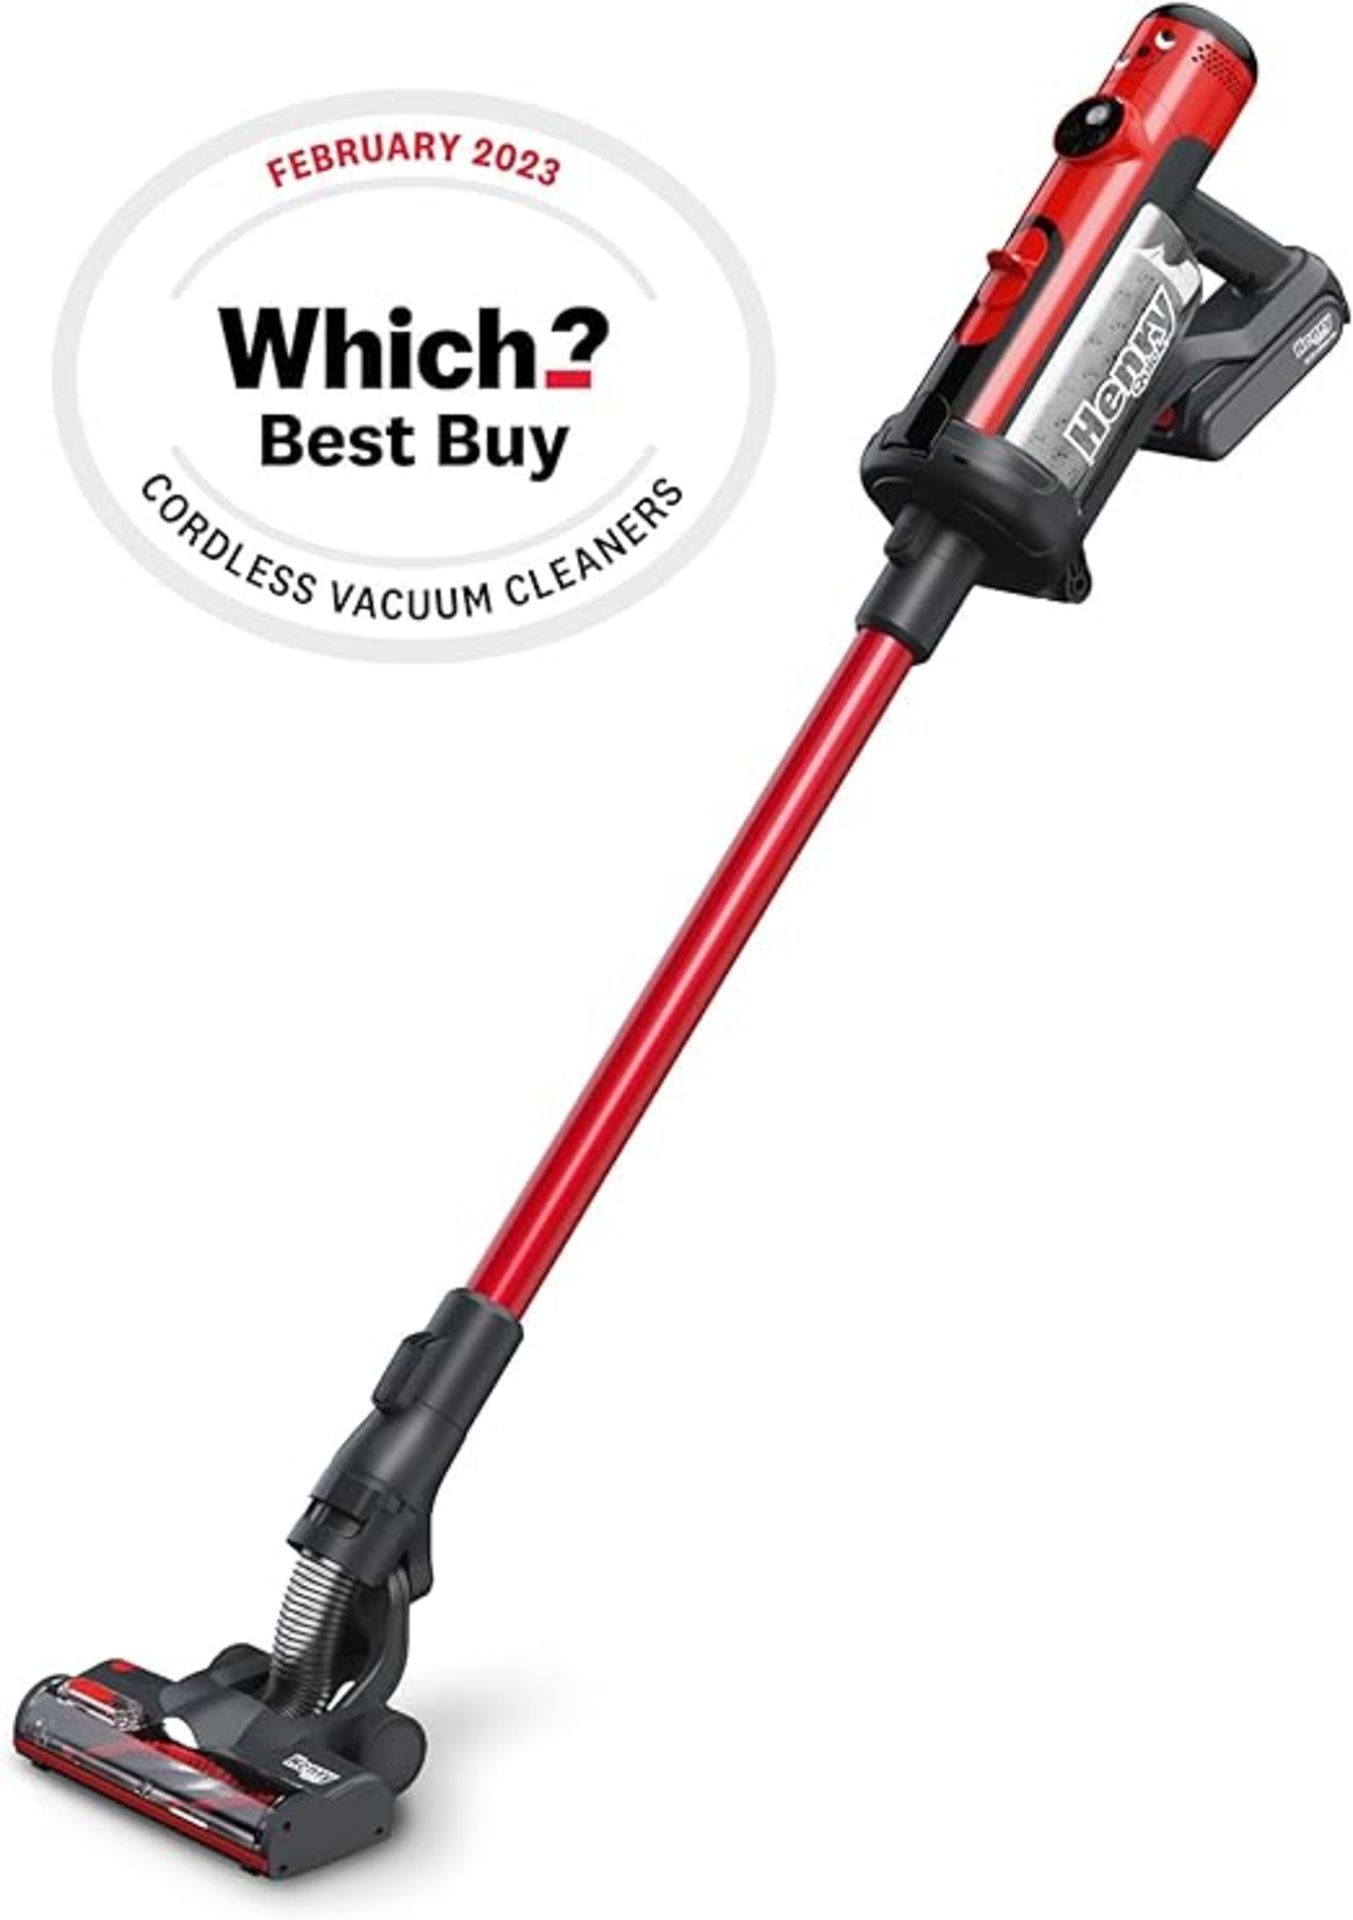 Brand New Henry Quick Cordless Stick Vacuum Cleaner, HEN.100, Up to 60 Mins Runtime, Dust-free